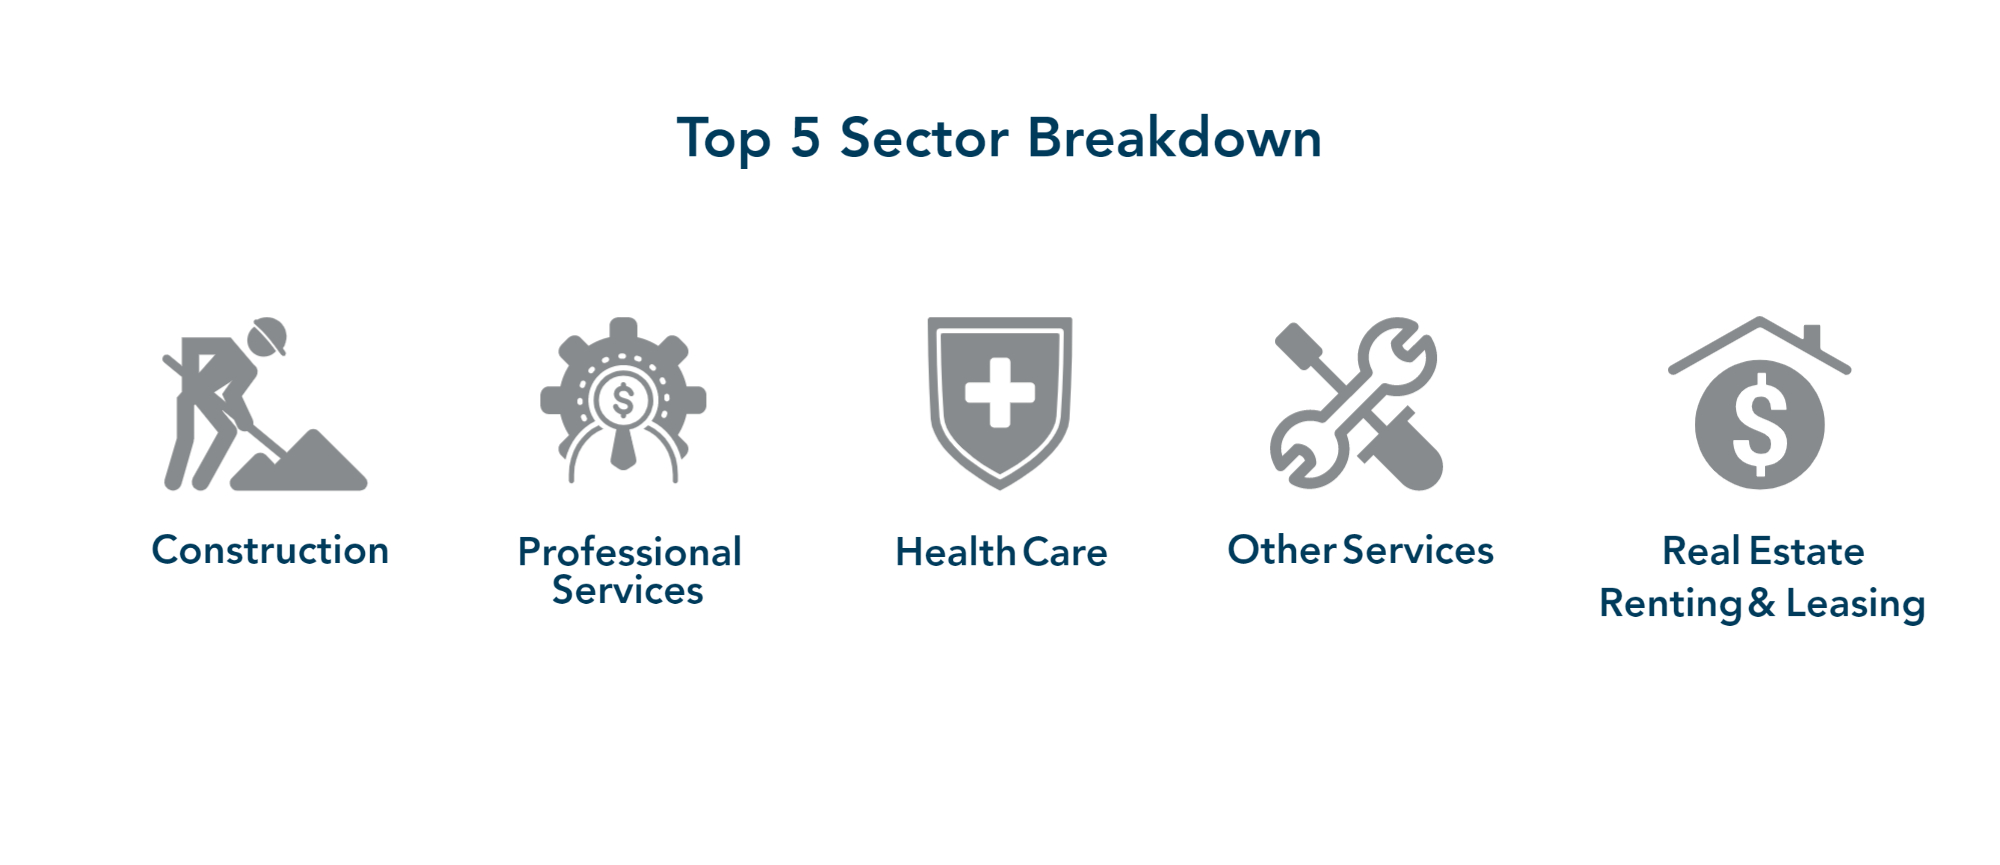 Top 5 sector breakdown (ranked): Construction, Professional Services, Health care, Other Services, Real Estate Renting & Leasing